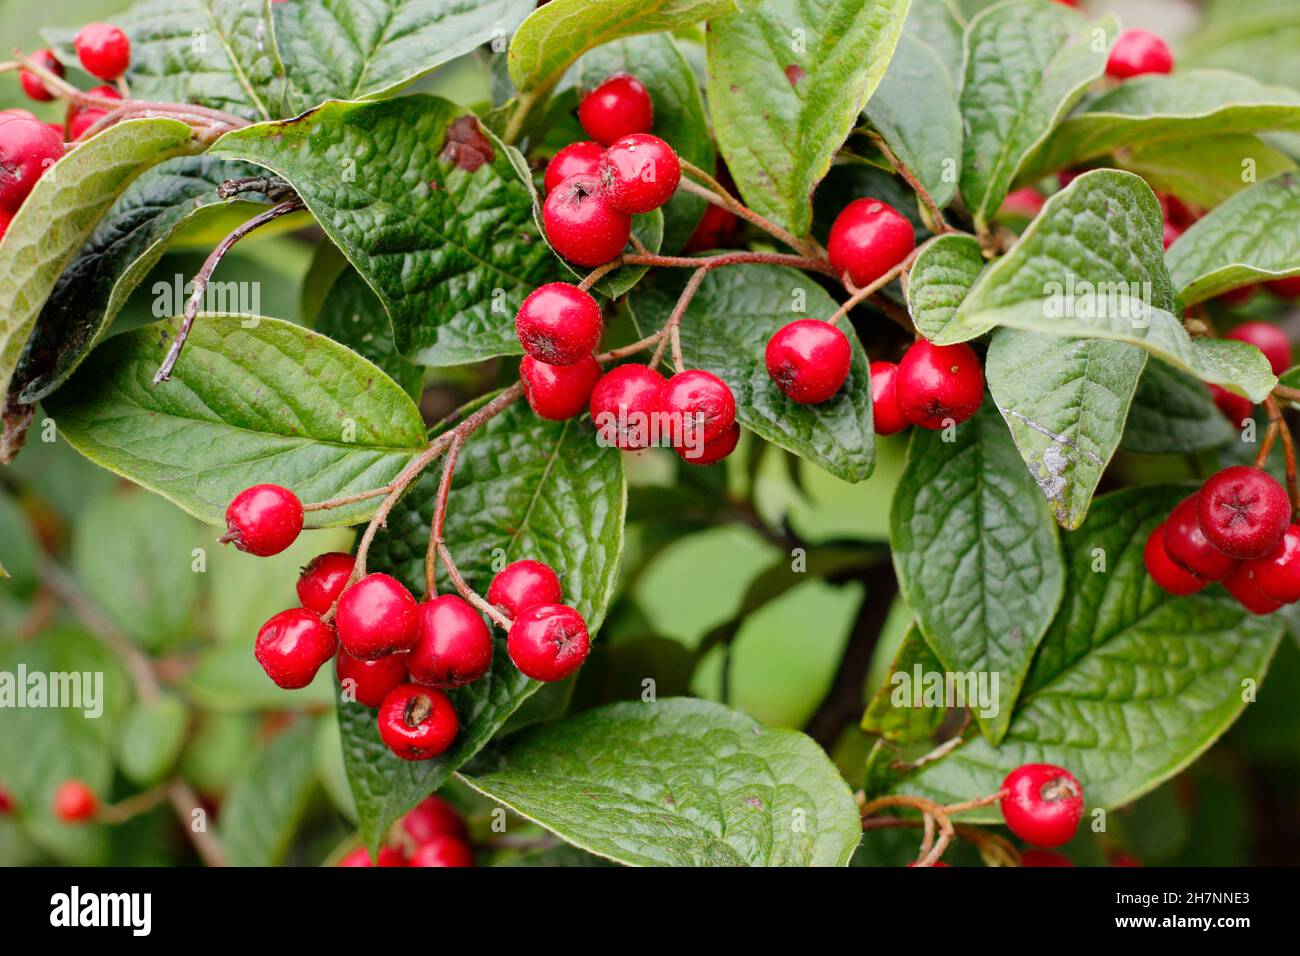 Cotoneaster bullatus. Hollyberry cotoneaster displaying characteristic bright red berries in autumn. UK Stock Photo